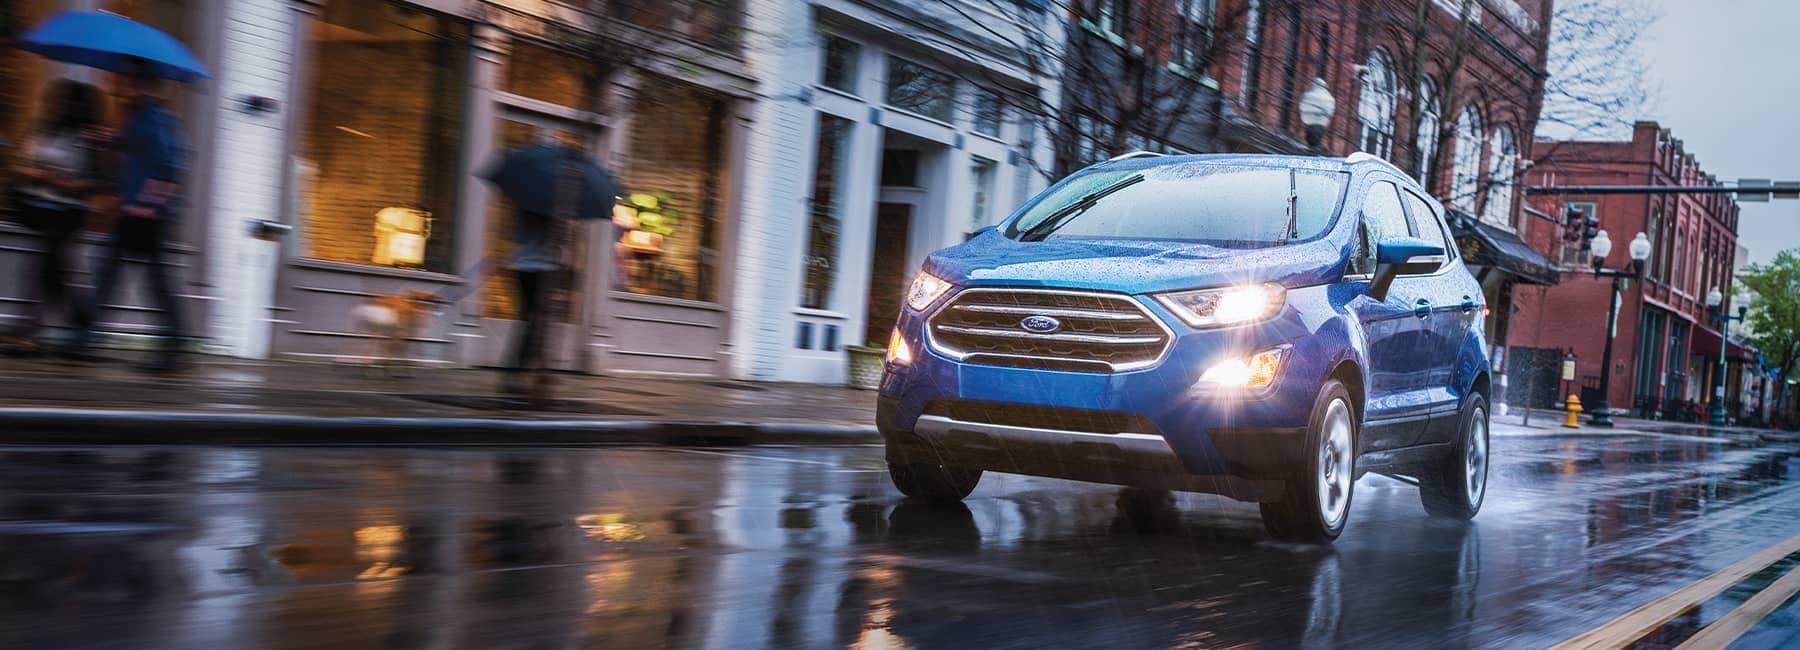 Blue-2021-Ford-EcoSport-driving-on-a-rainy-suburban-town-street